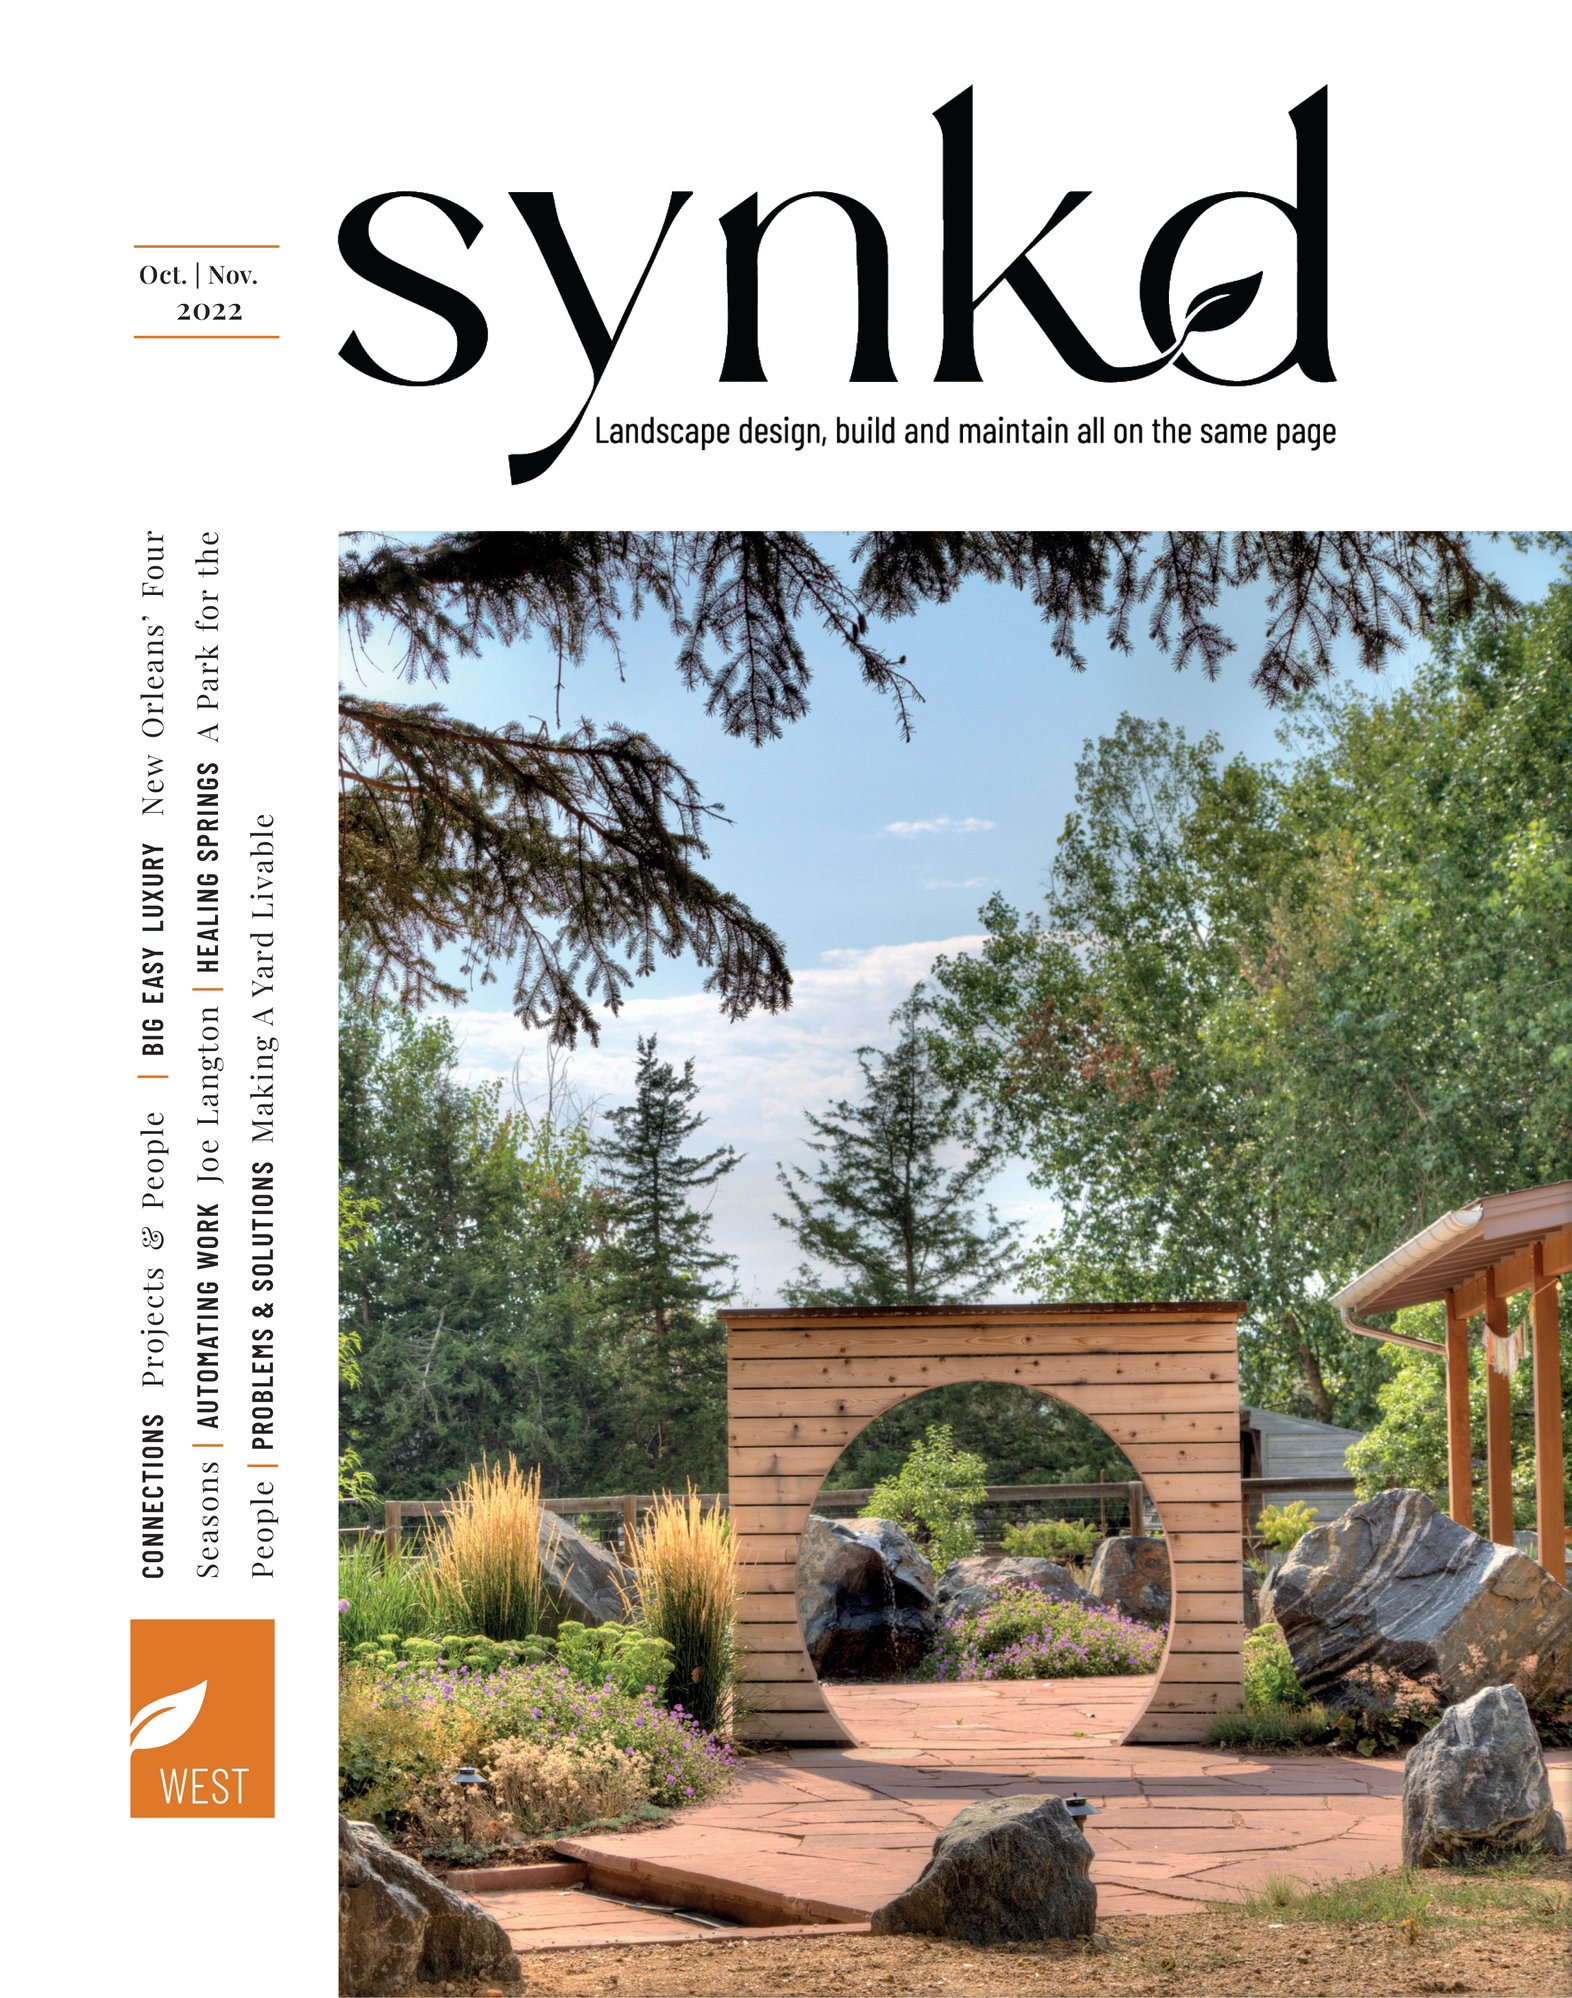 The first issue of SYNKD West published in October|November 2022 featuring Cheri Stringer's projects featuring her use of steel in landscape designs.